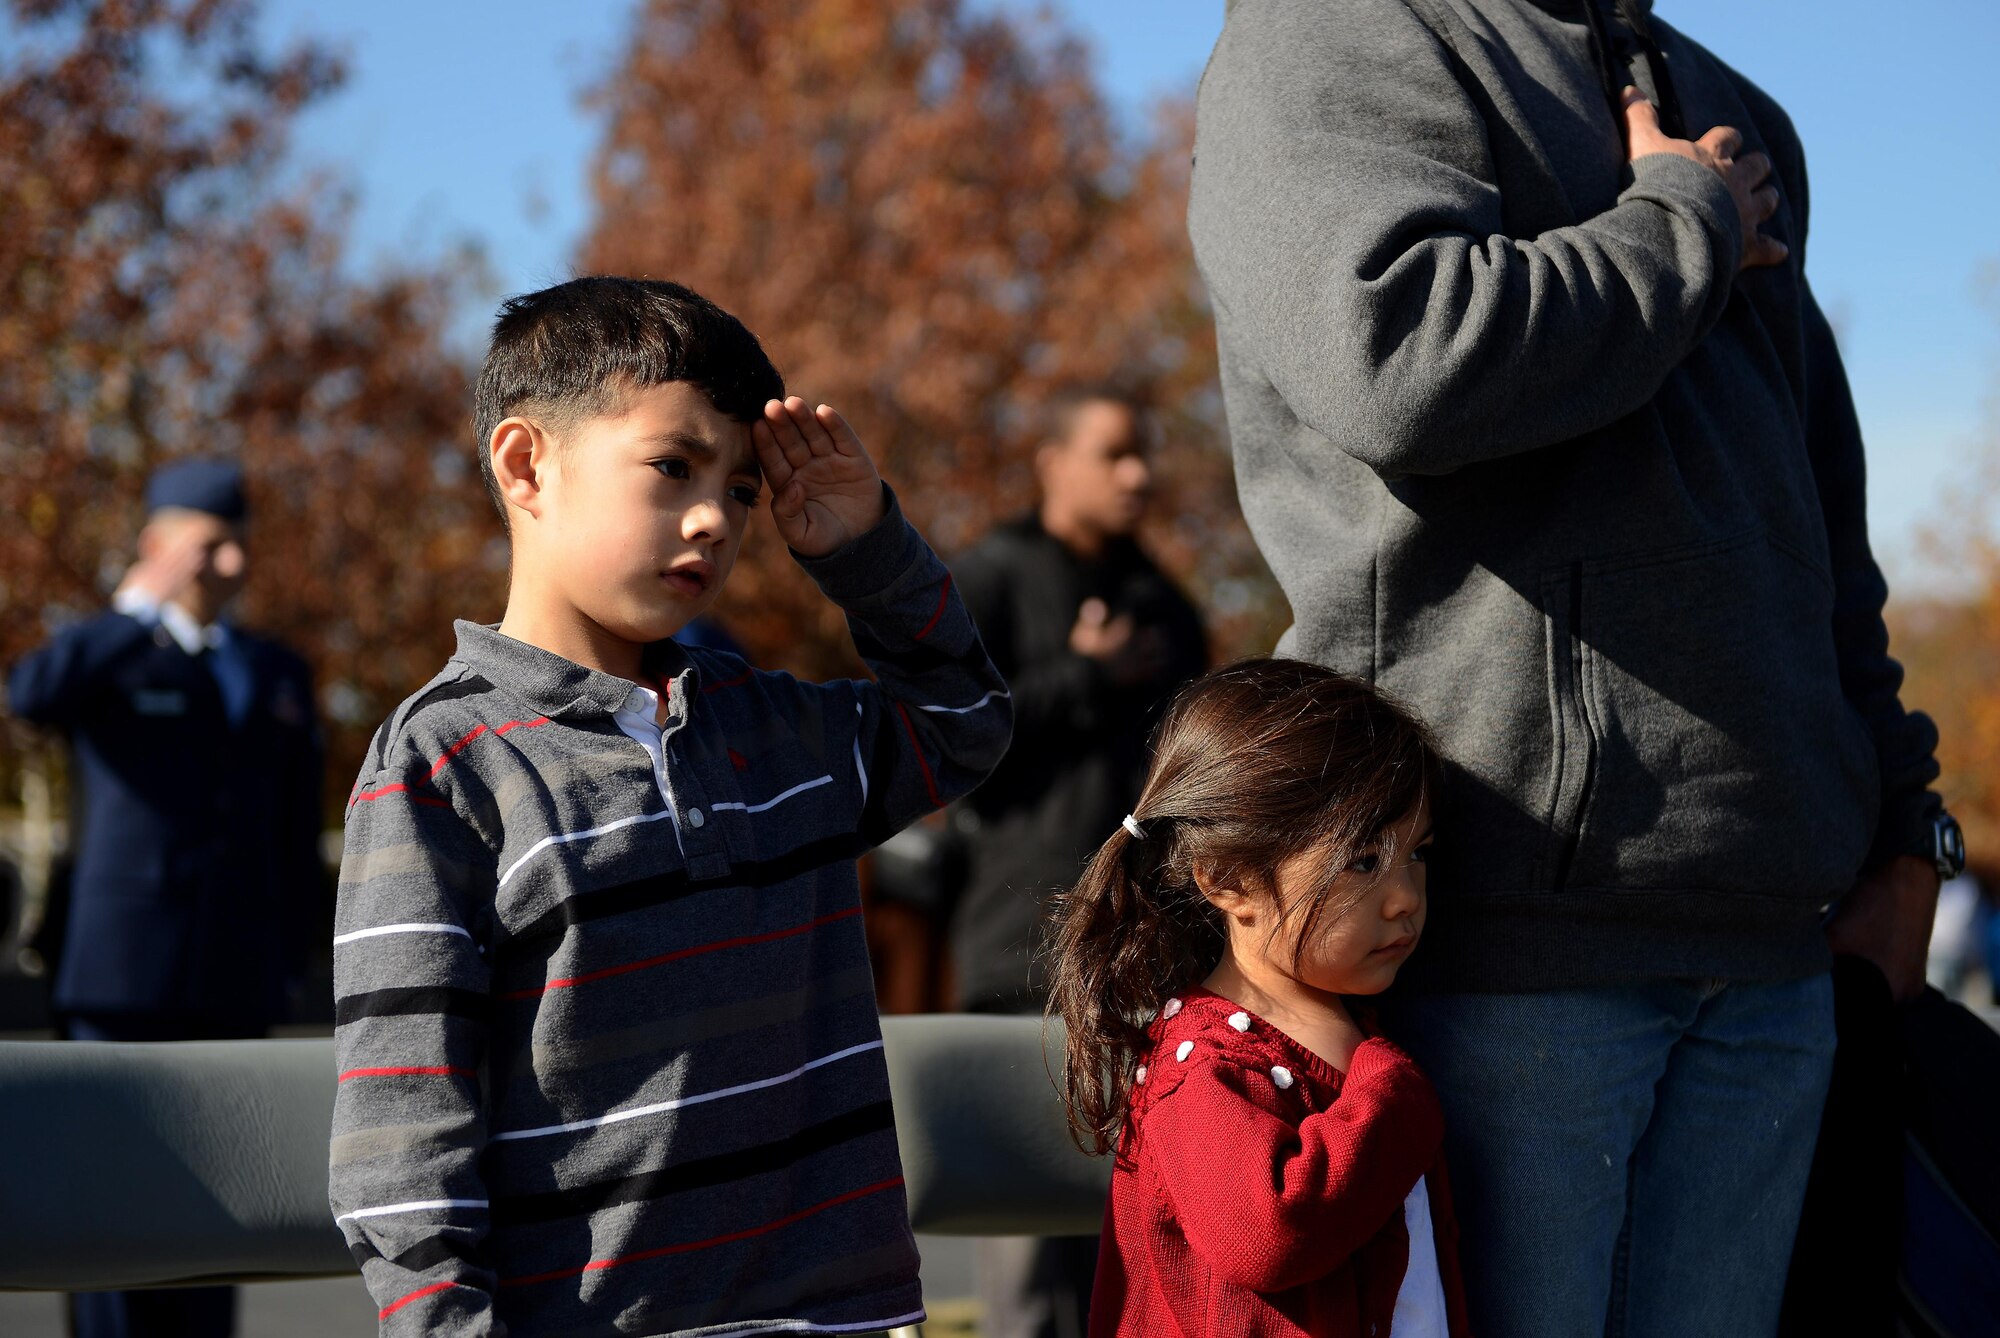 Michael Eloy, 5, (from left) Kimiko Eloy, 3, and their father, Army Maj. Cabera Eloy salute as the colors are presented during a Veterans Day wreath laying ceremony at the Air Force Memorial, Arlington, Va., Nov. 11, 2013. More than 100 veterans, service members, family members and supporters came out for the wreath laying ceremony. 